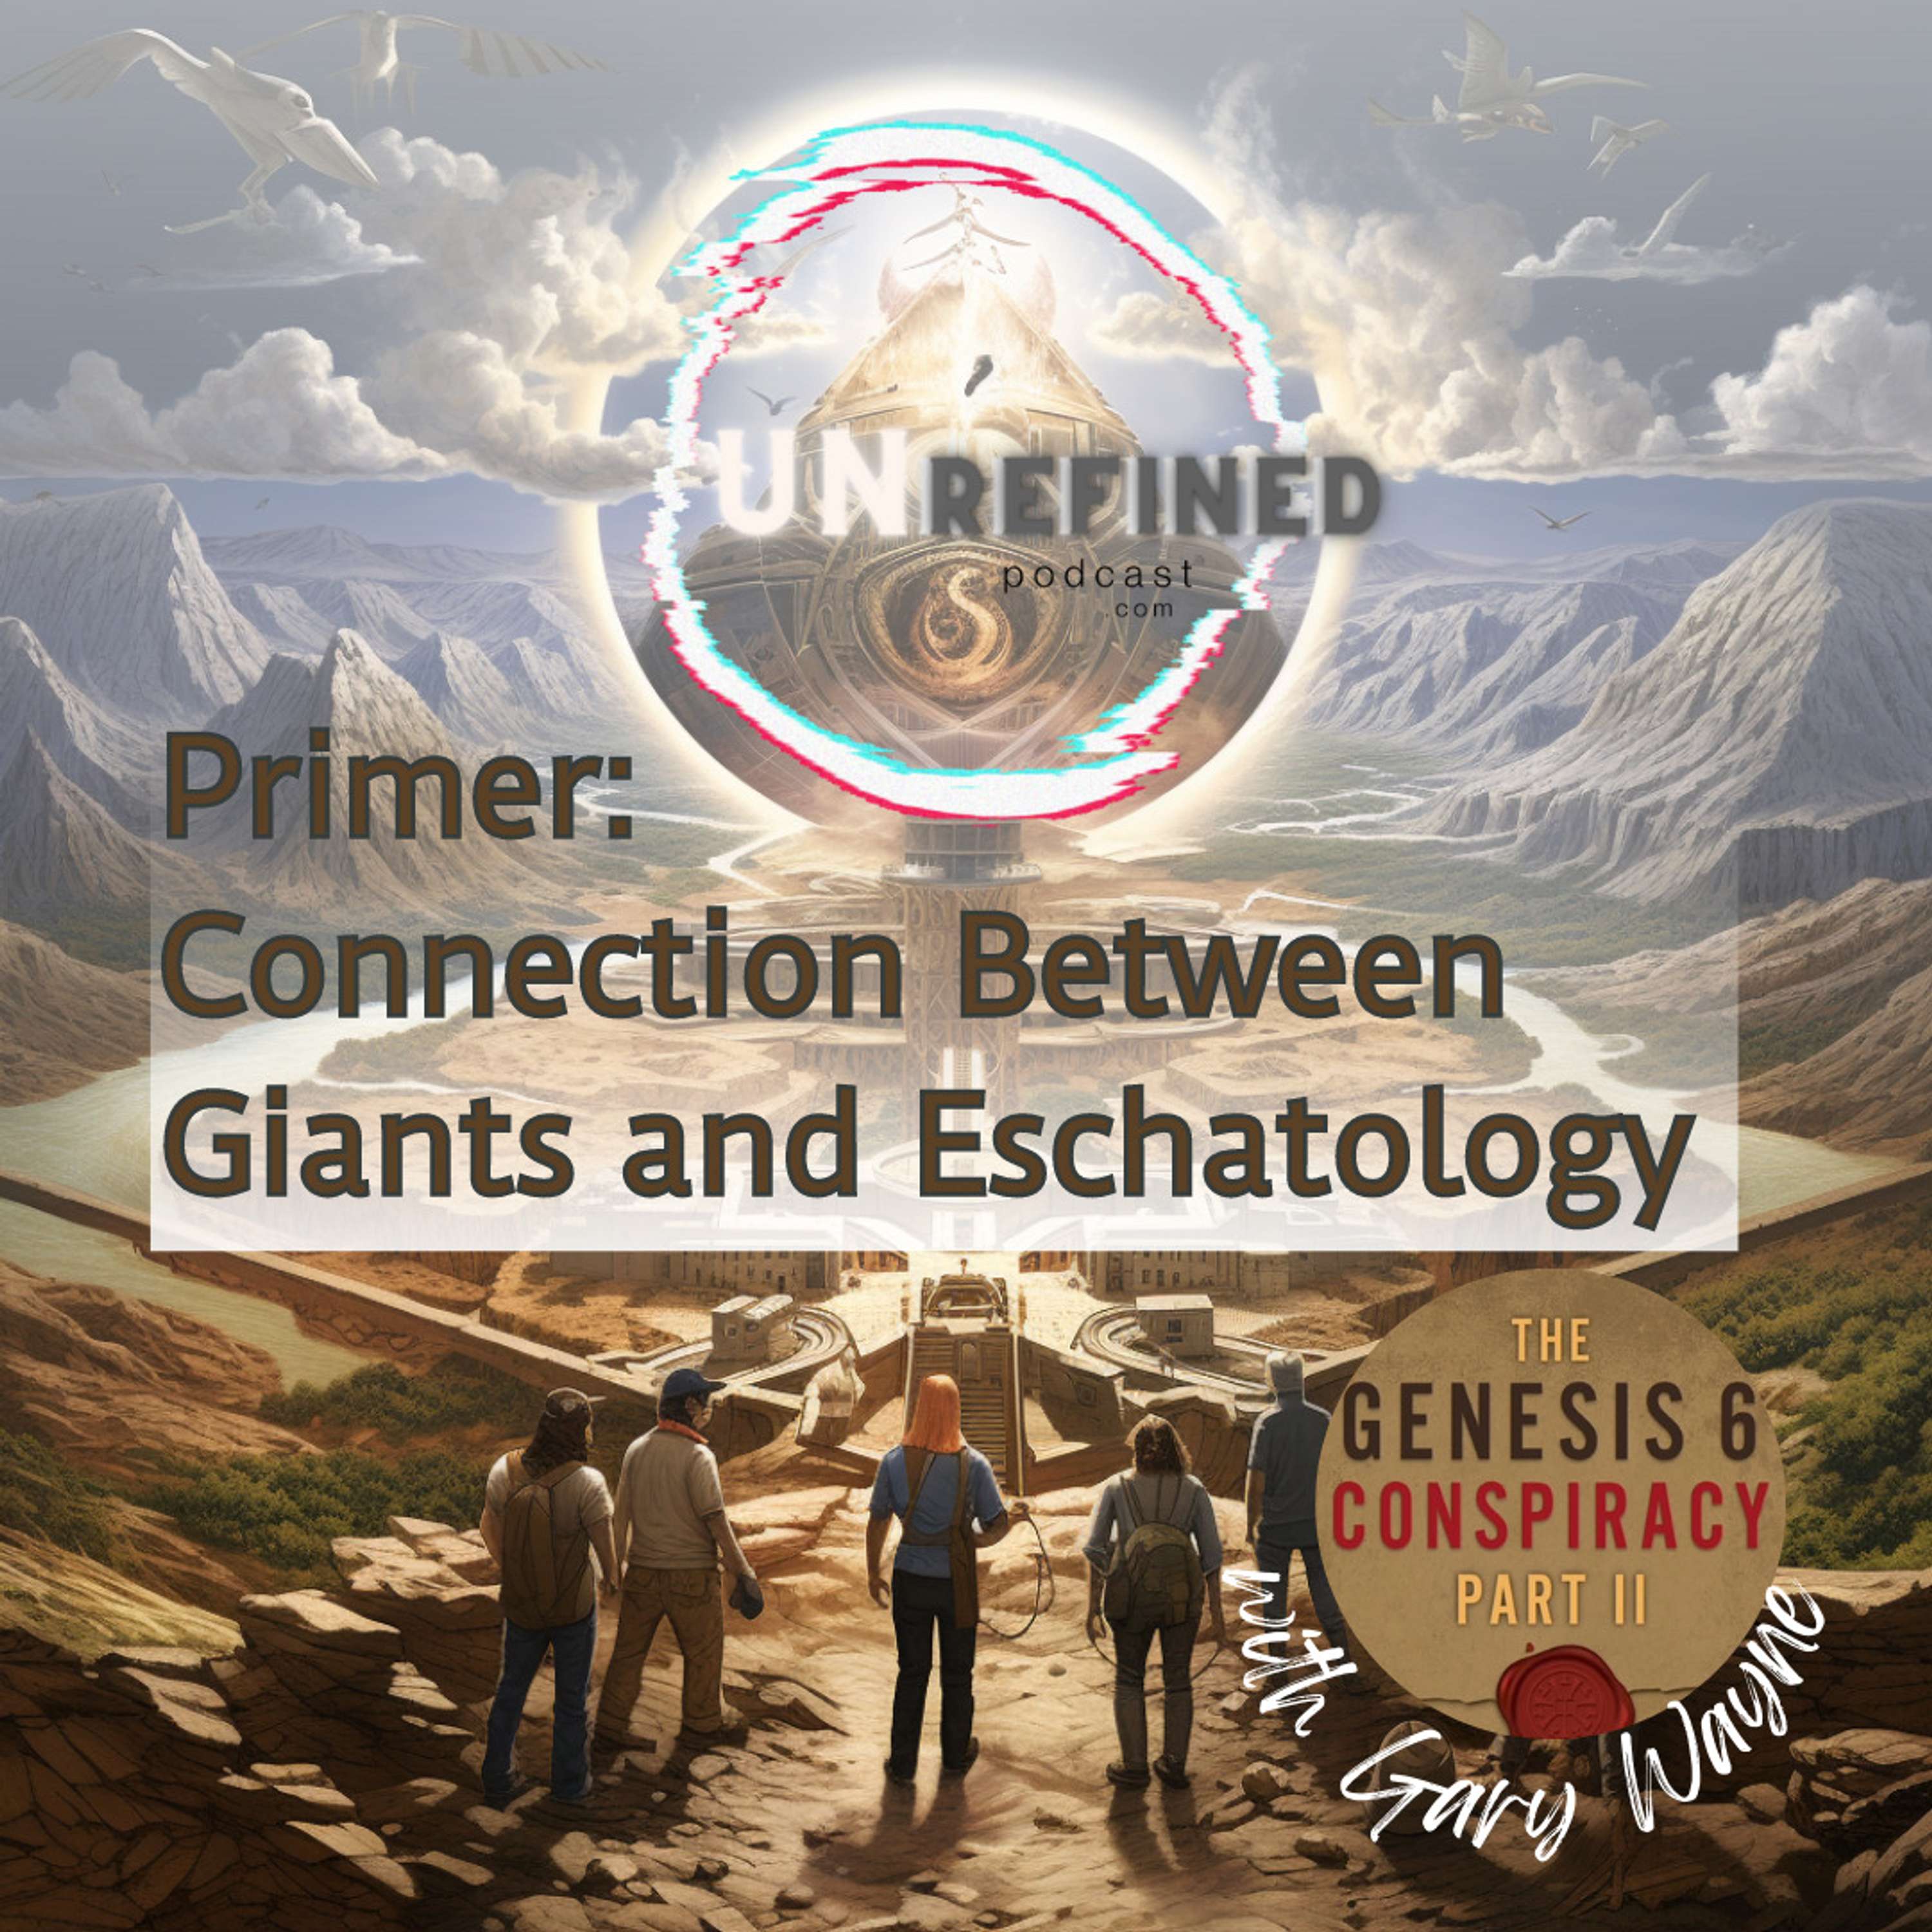 Primer: Connection Between Giants and Eschatology